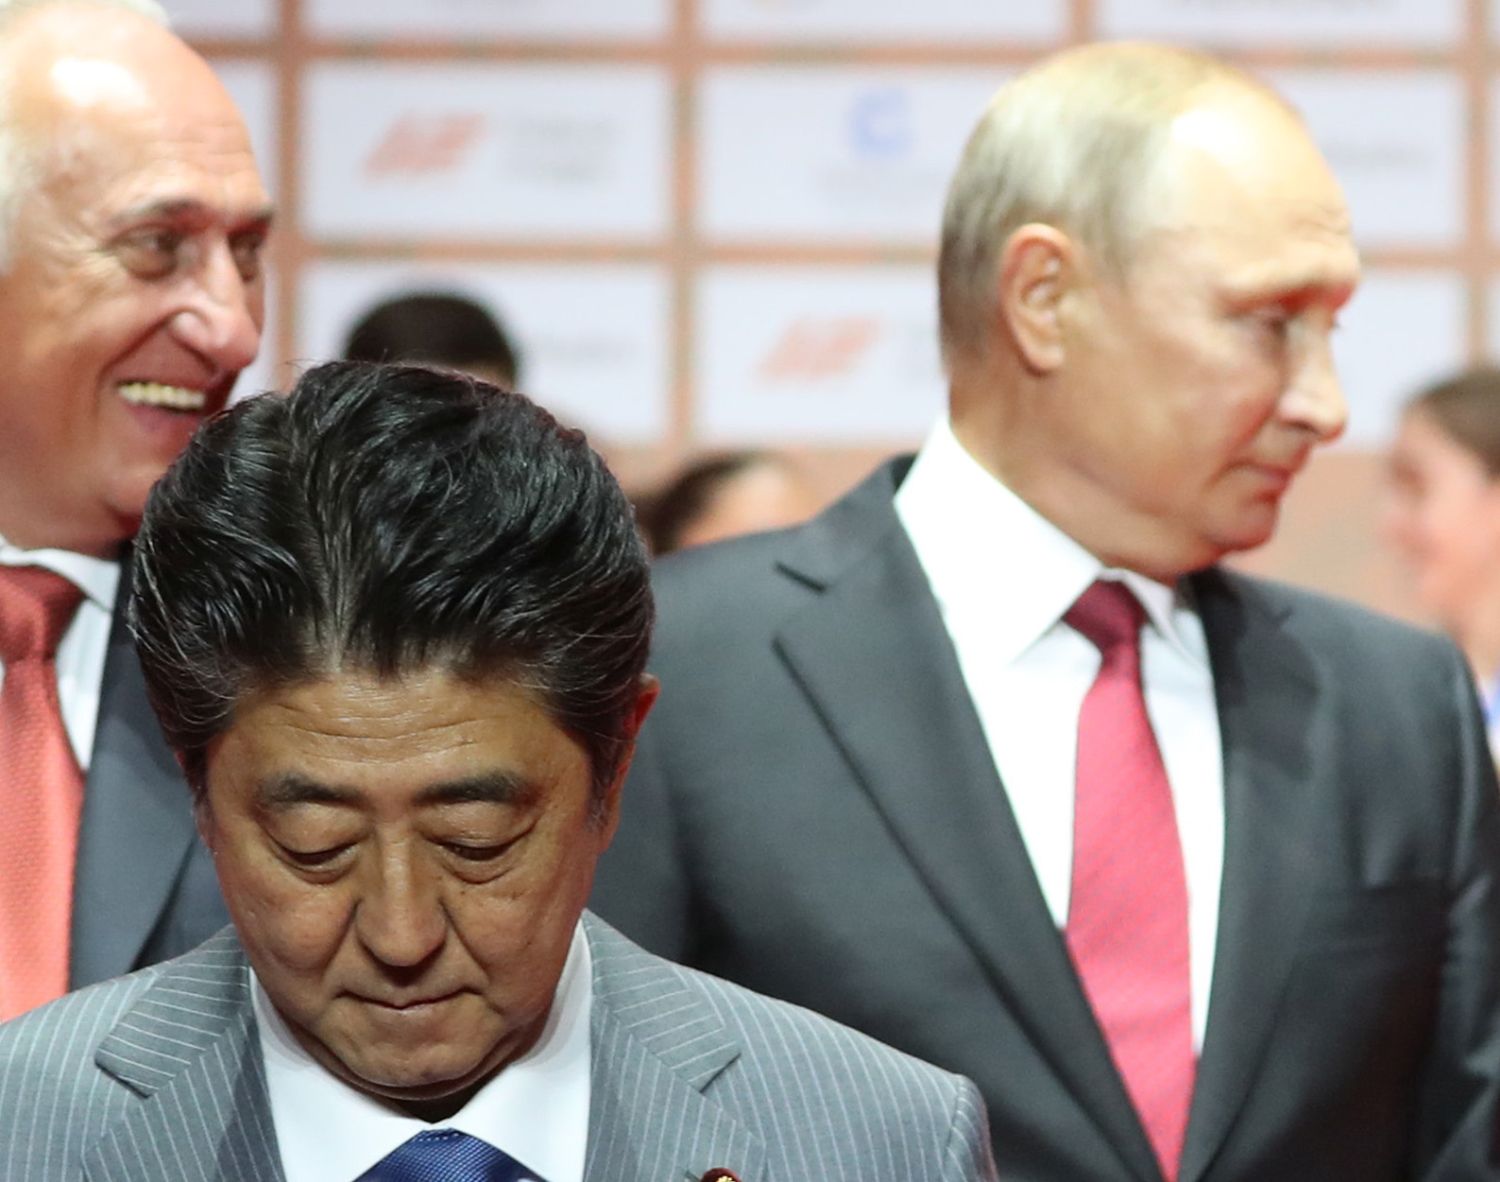 [EDITORIAL] Without Russia Reverting Northern Territories, Japan Must Reject ‘Peace Pact’